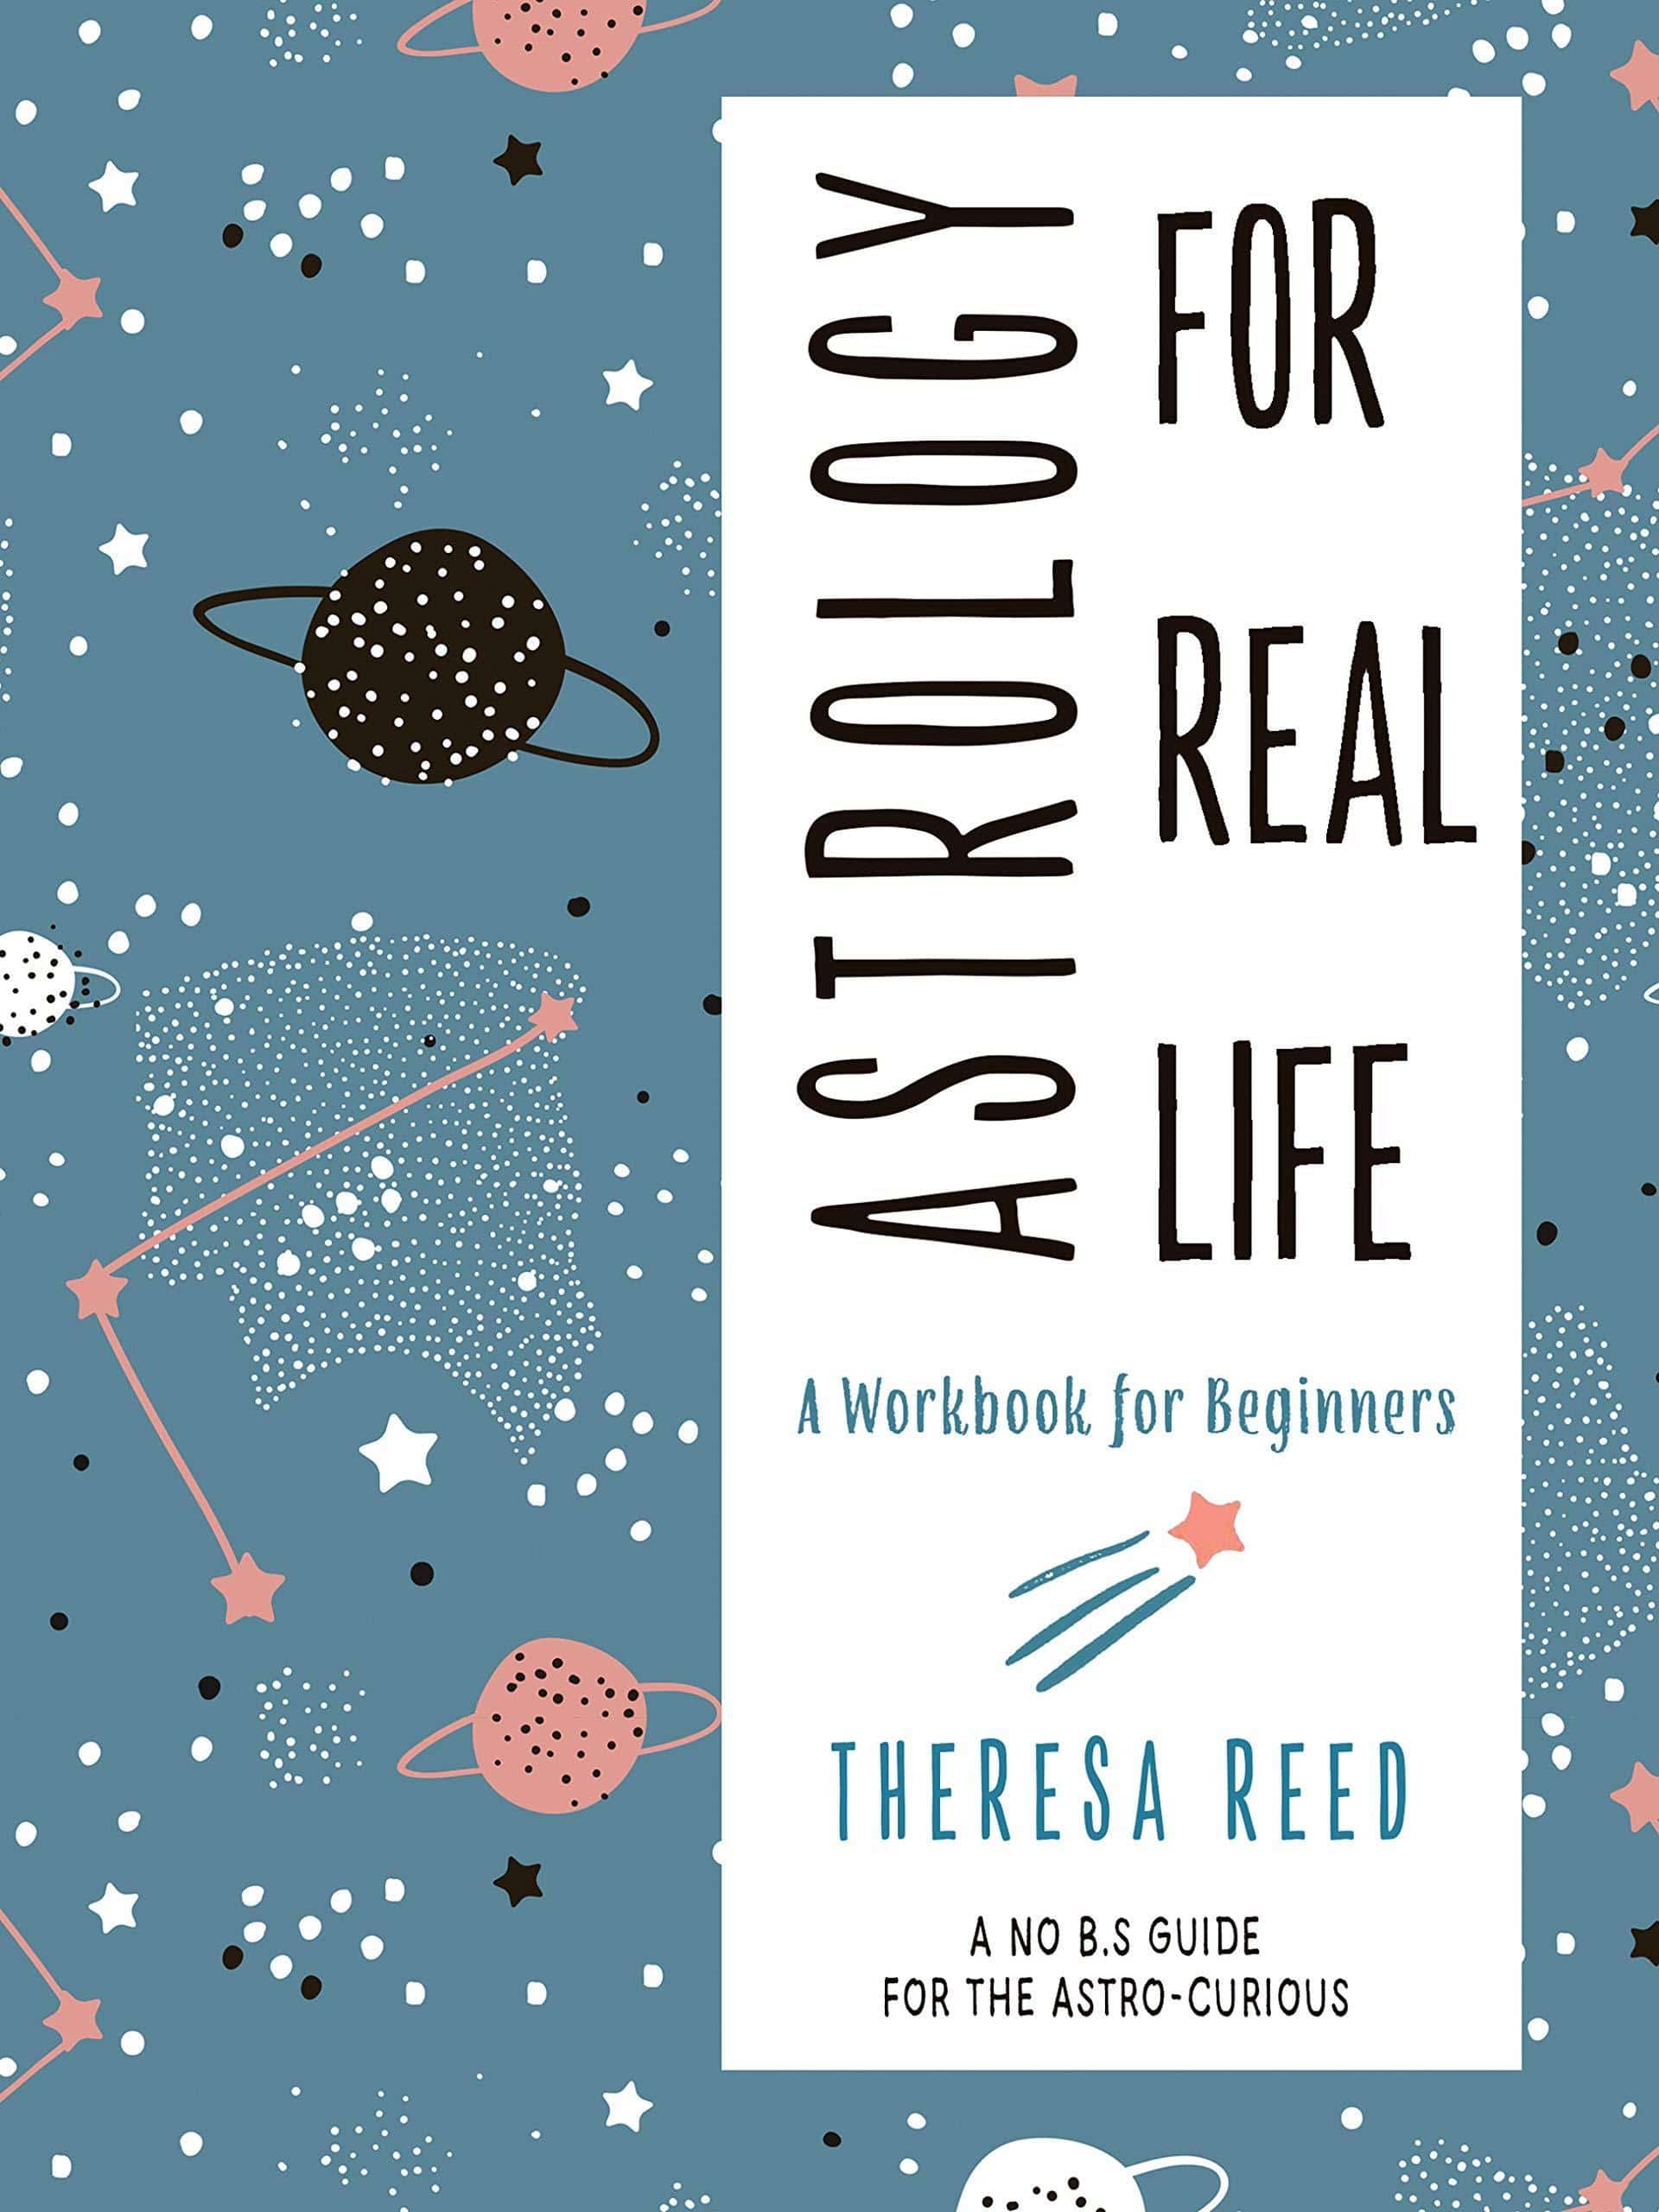 Astrology for Real Life: A Workbook for Beginners - SureShot Books Publishing LLC